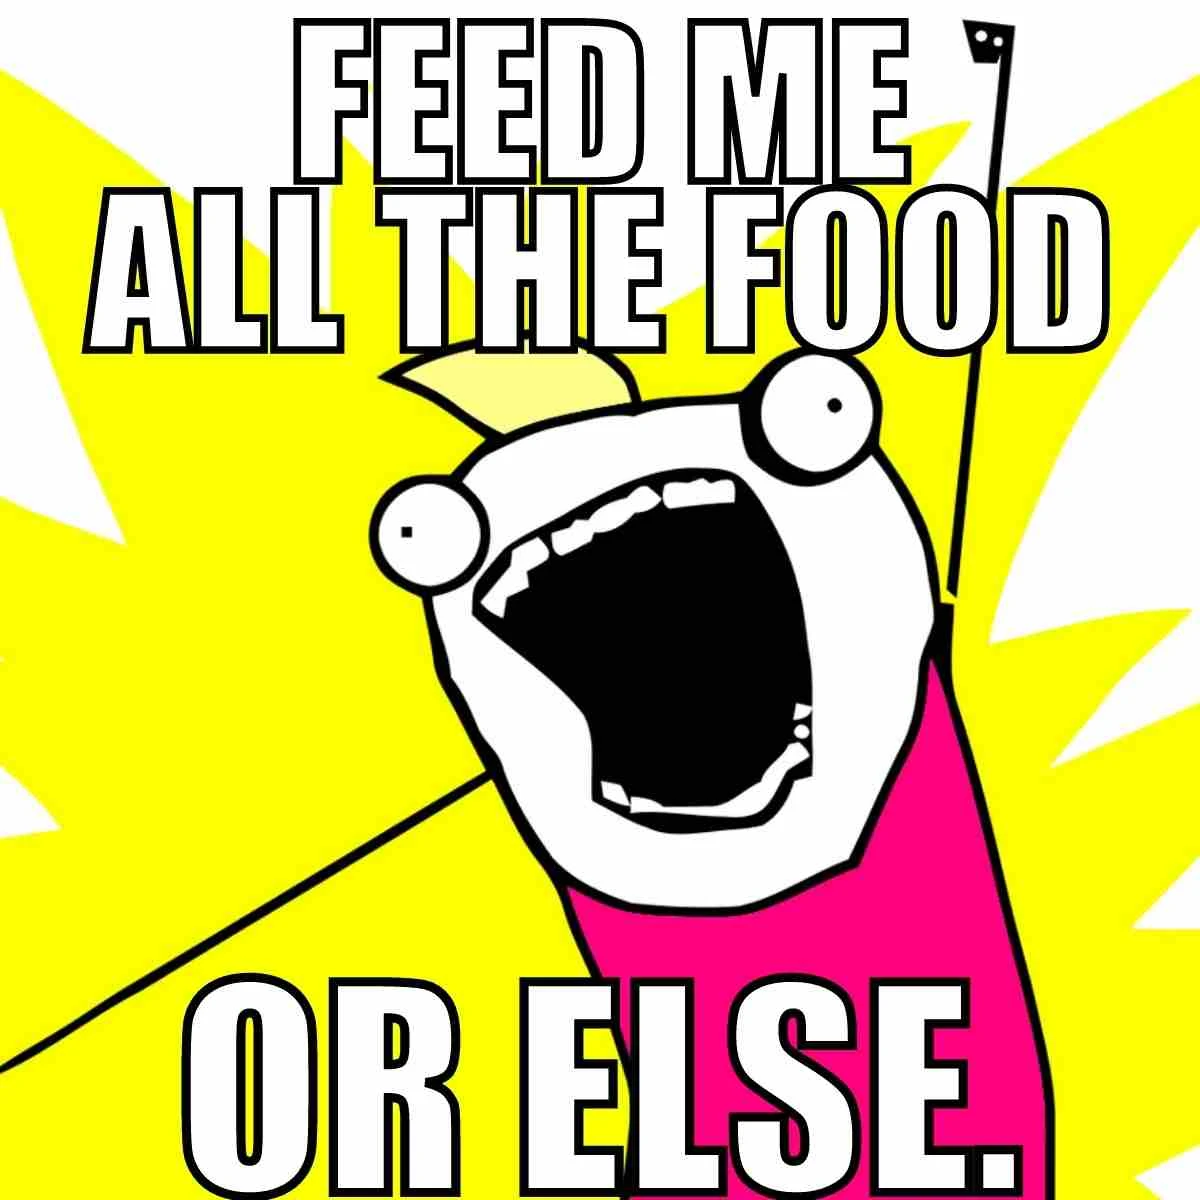 feed me all the food or else